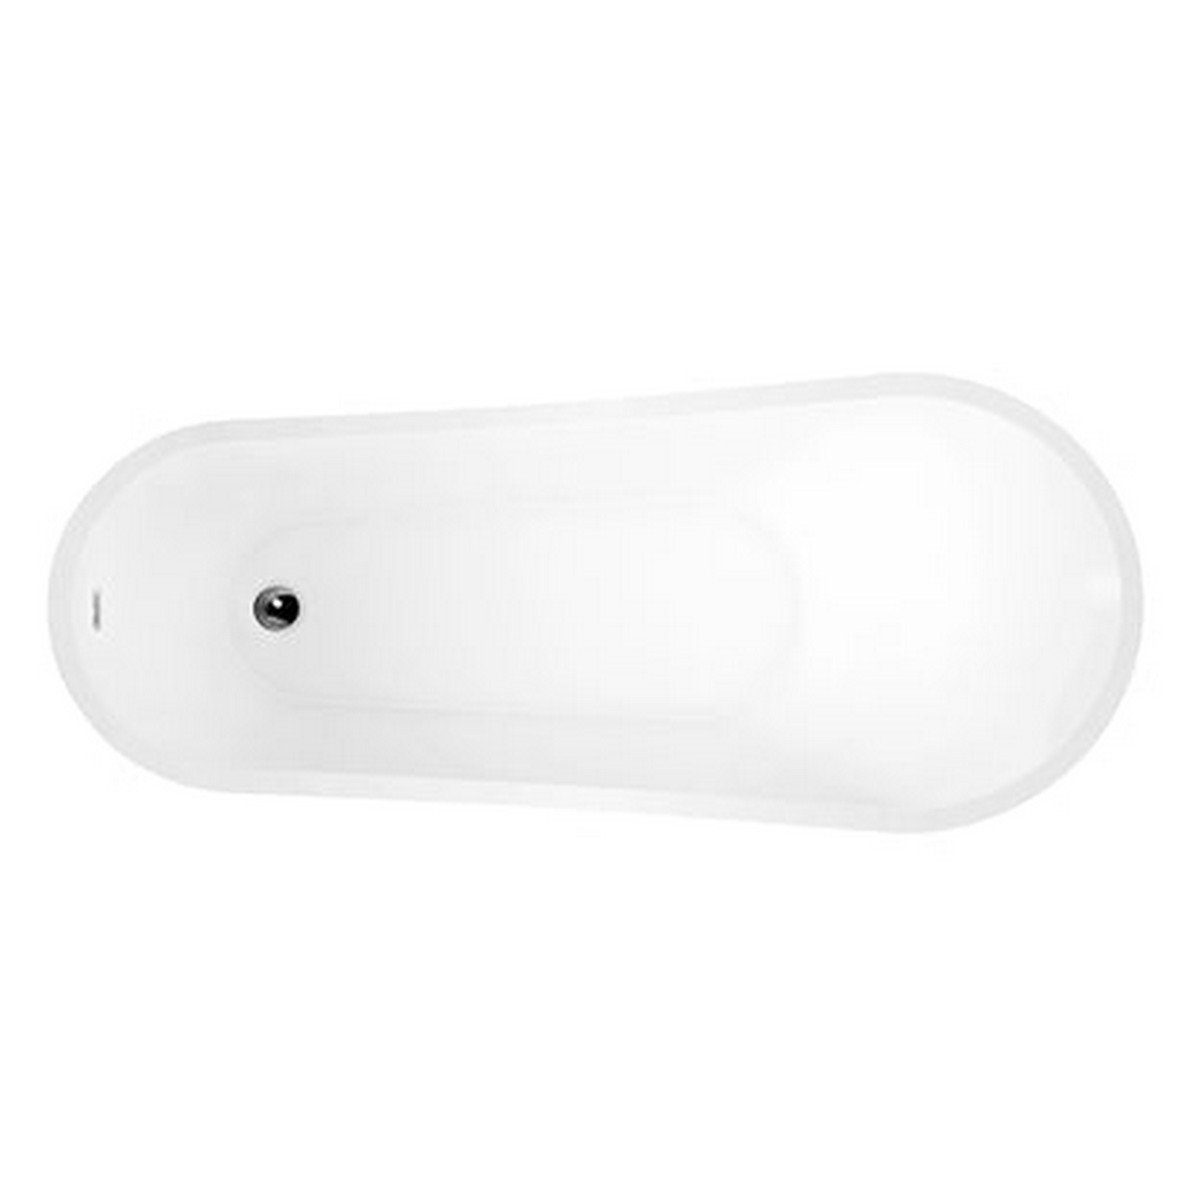 BARCLAY ATSN70FIG MCGUIRE 69 1/4 INCH ACRYLIC FREESTANDING OVAL SOAKING SLIPPER BATHTUB IN WHITE WITH INTEGRAL DRAIN AND OVERFLOW